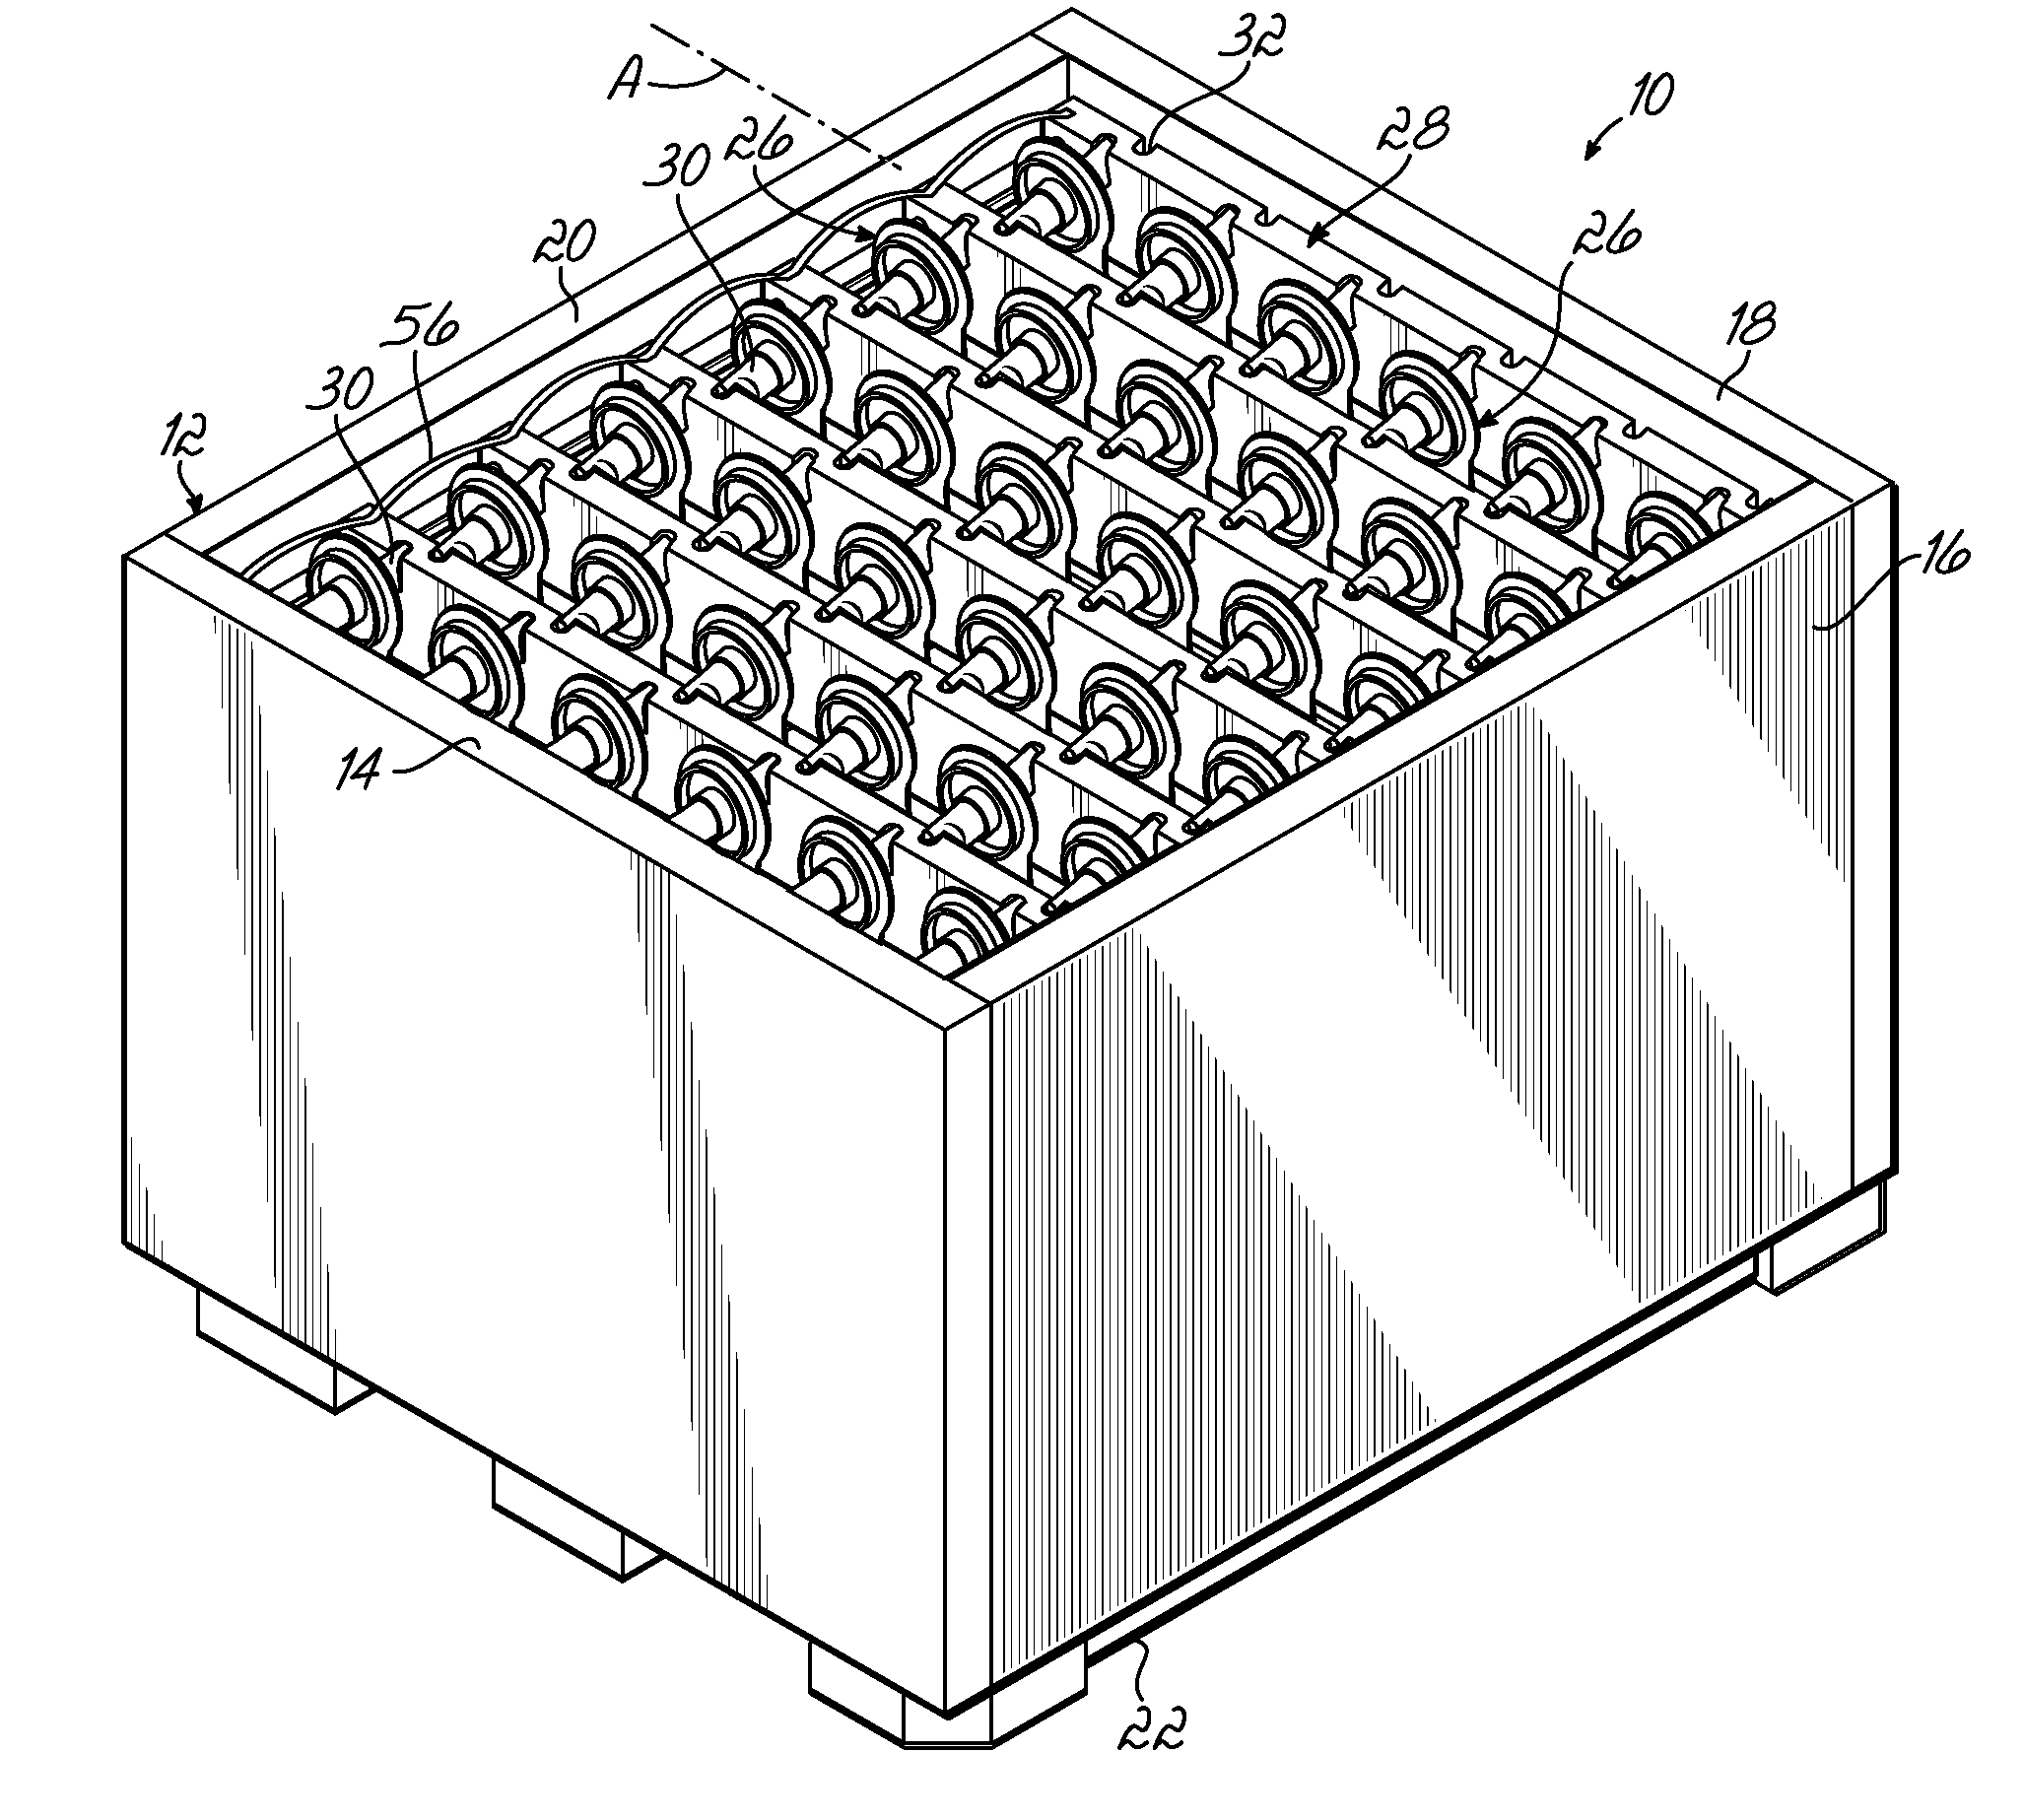 Method of Loading/Unloading Product From Container Having Movable Pouches